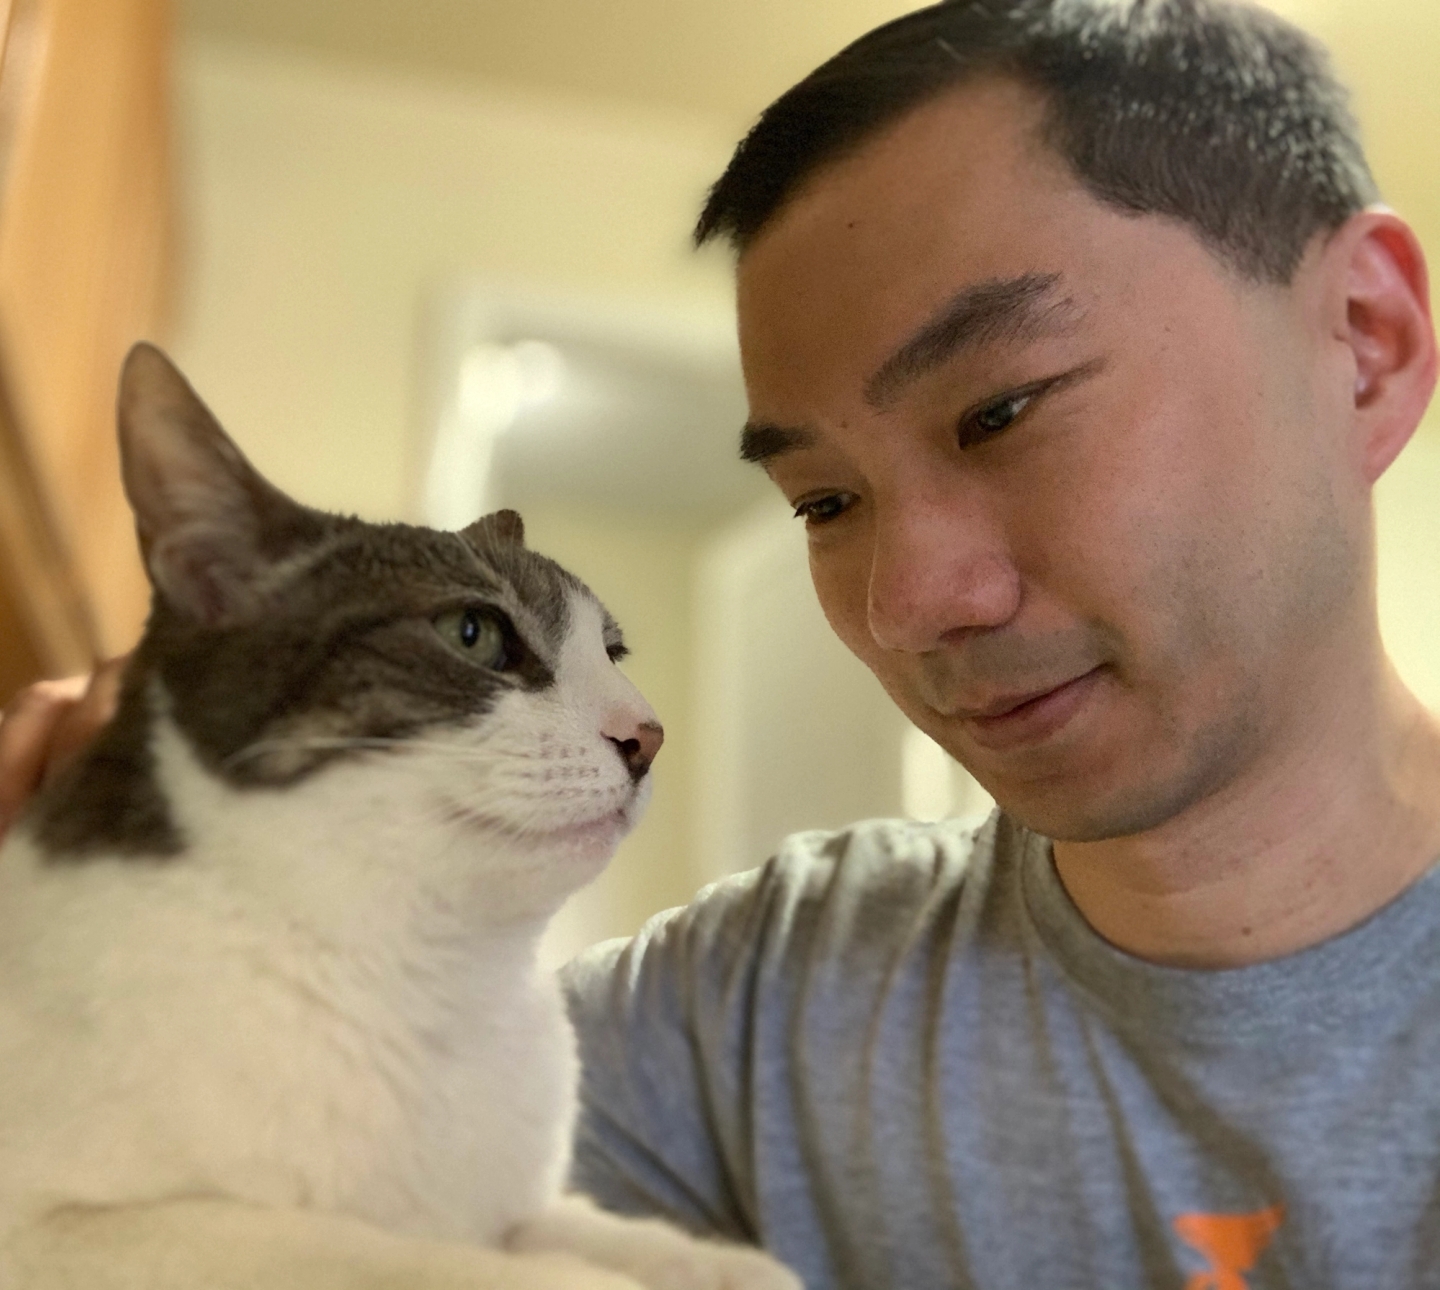 Cat Person co-founder Jimmy smiling at his cat Pebbles as she looks into the distance